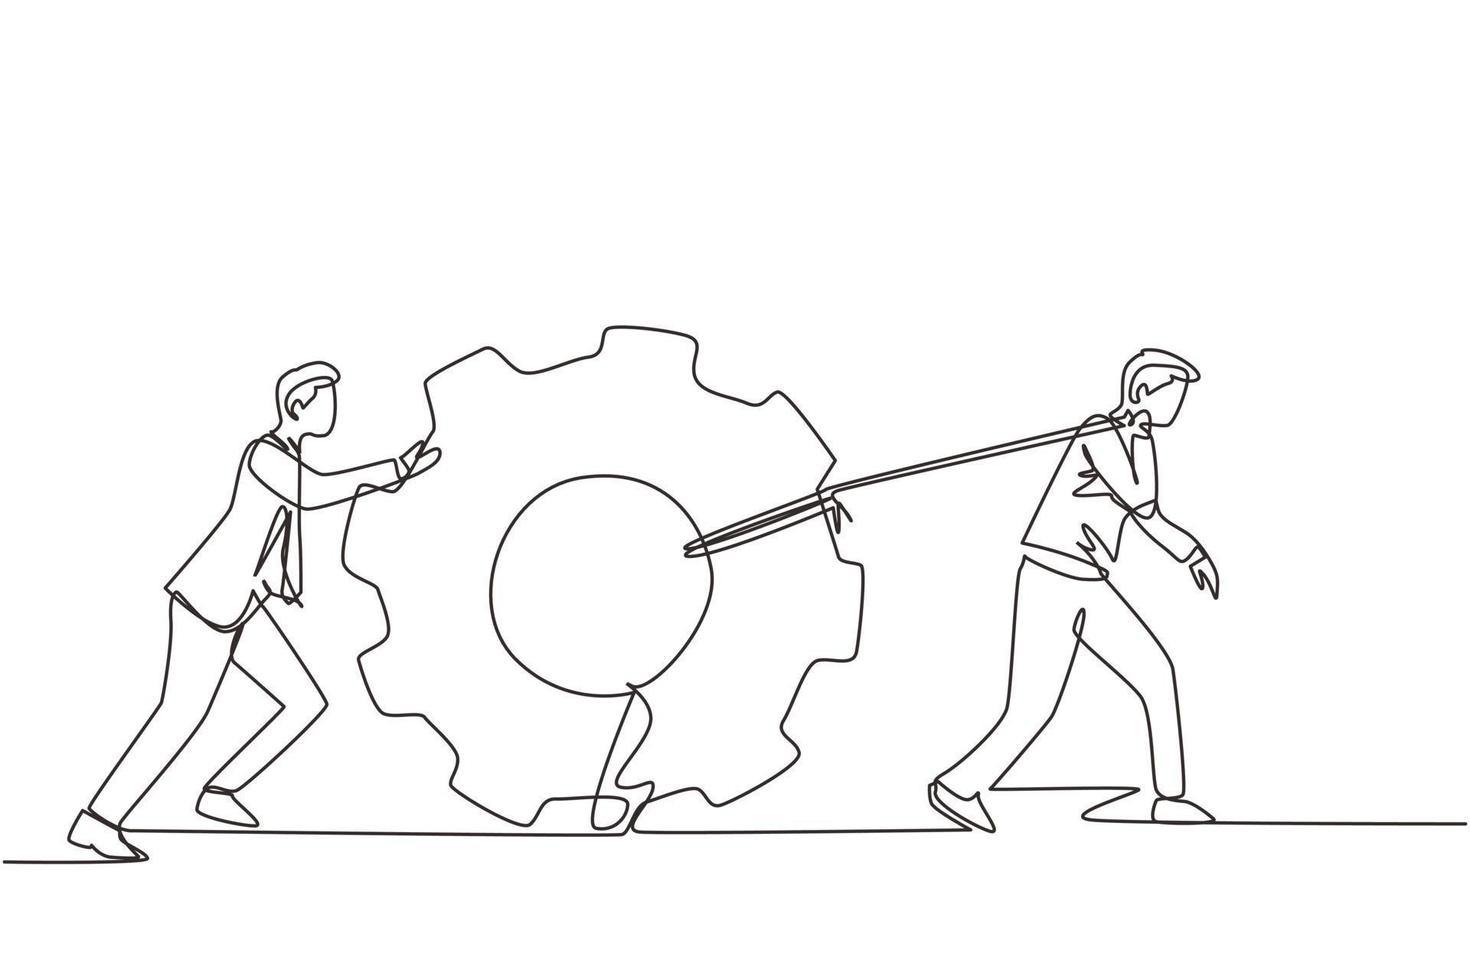 Single one line drawing business men pulling large gear on rope. Business leader help team pull cog, businessman push gear, business concept. Continuous line draw design graphic vector illustration